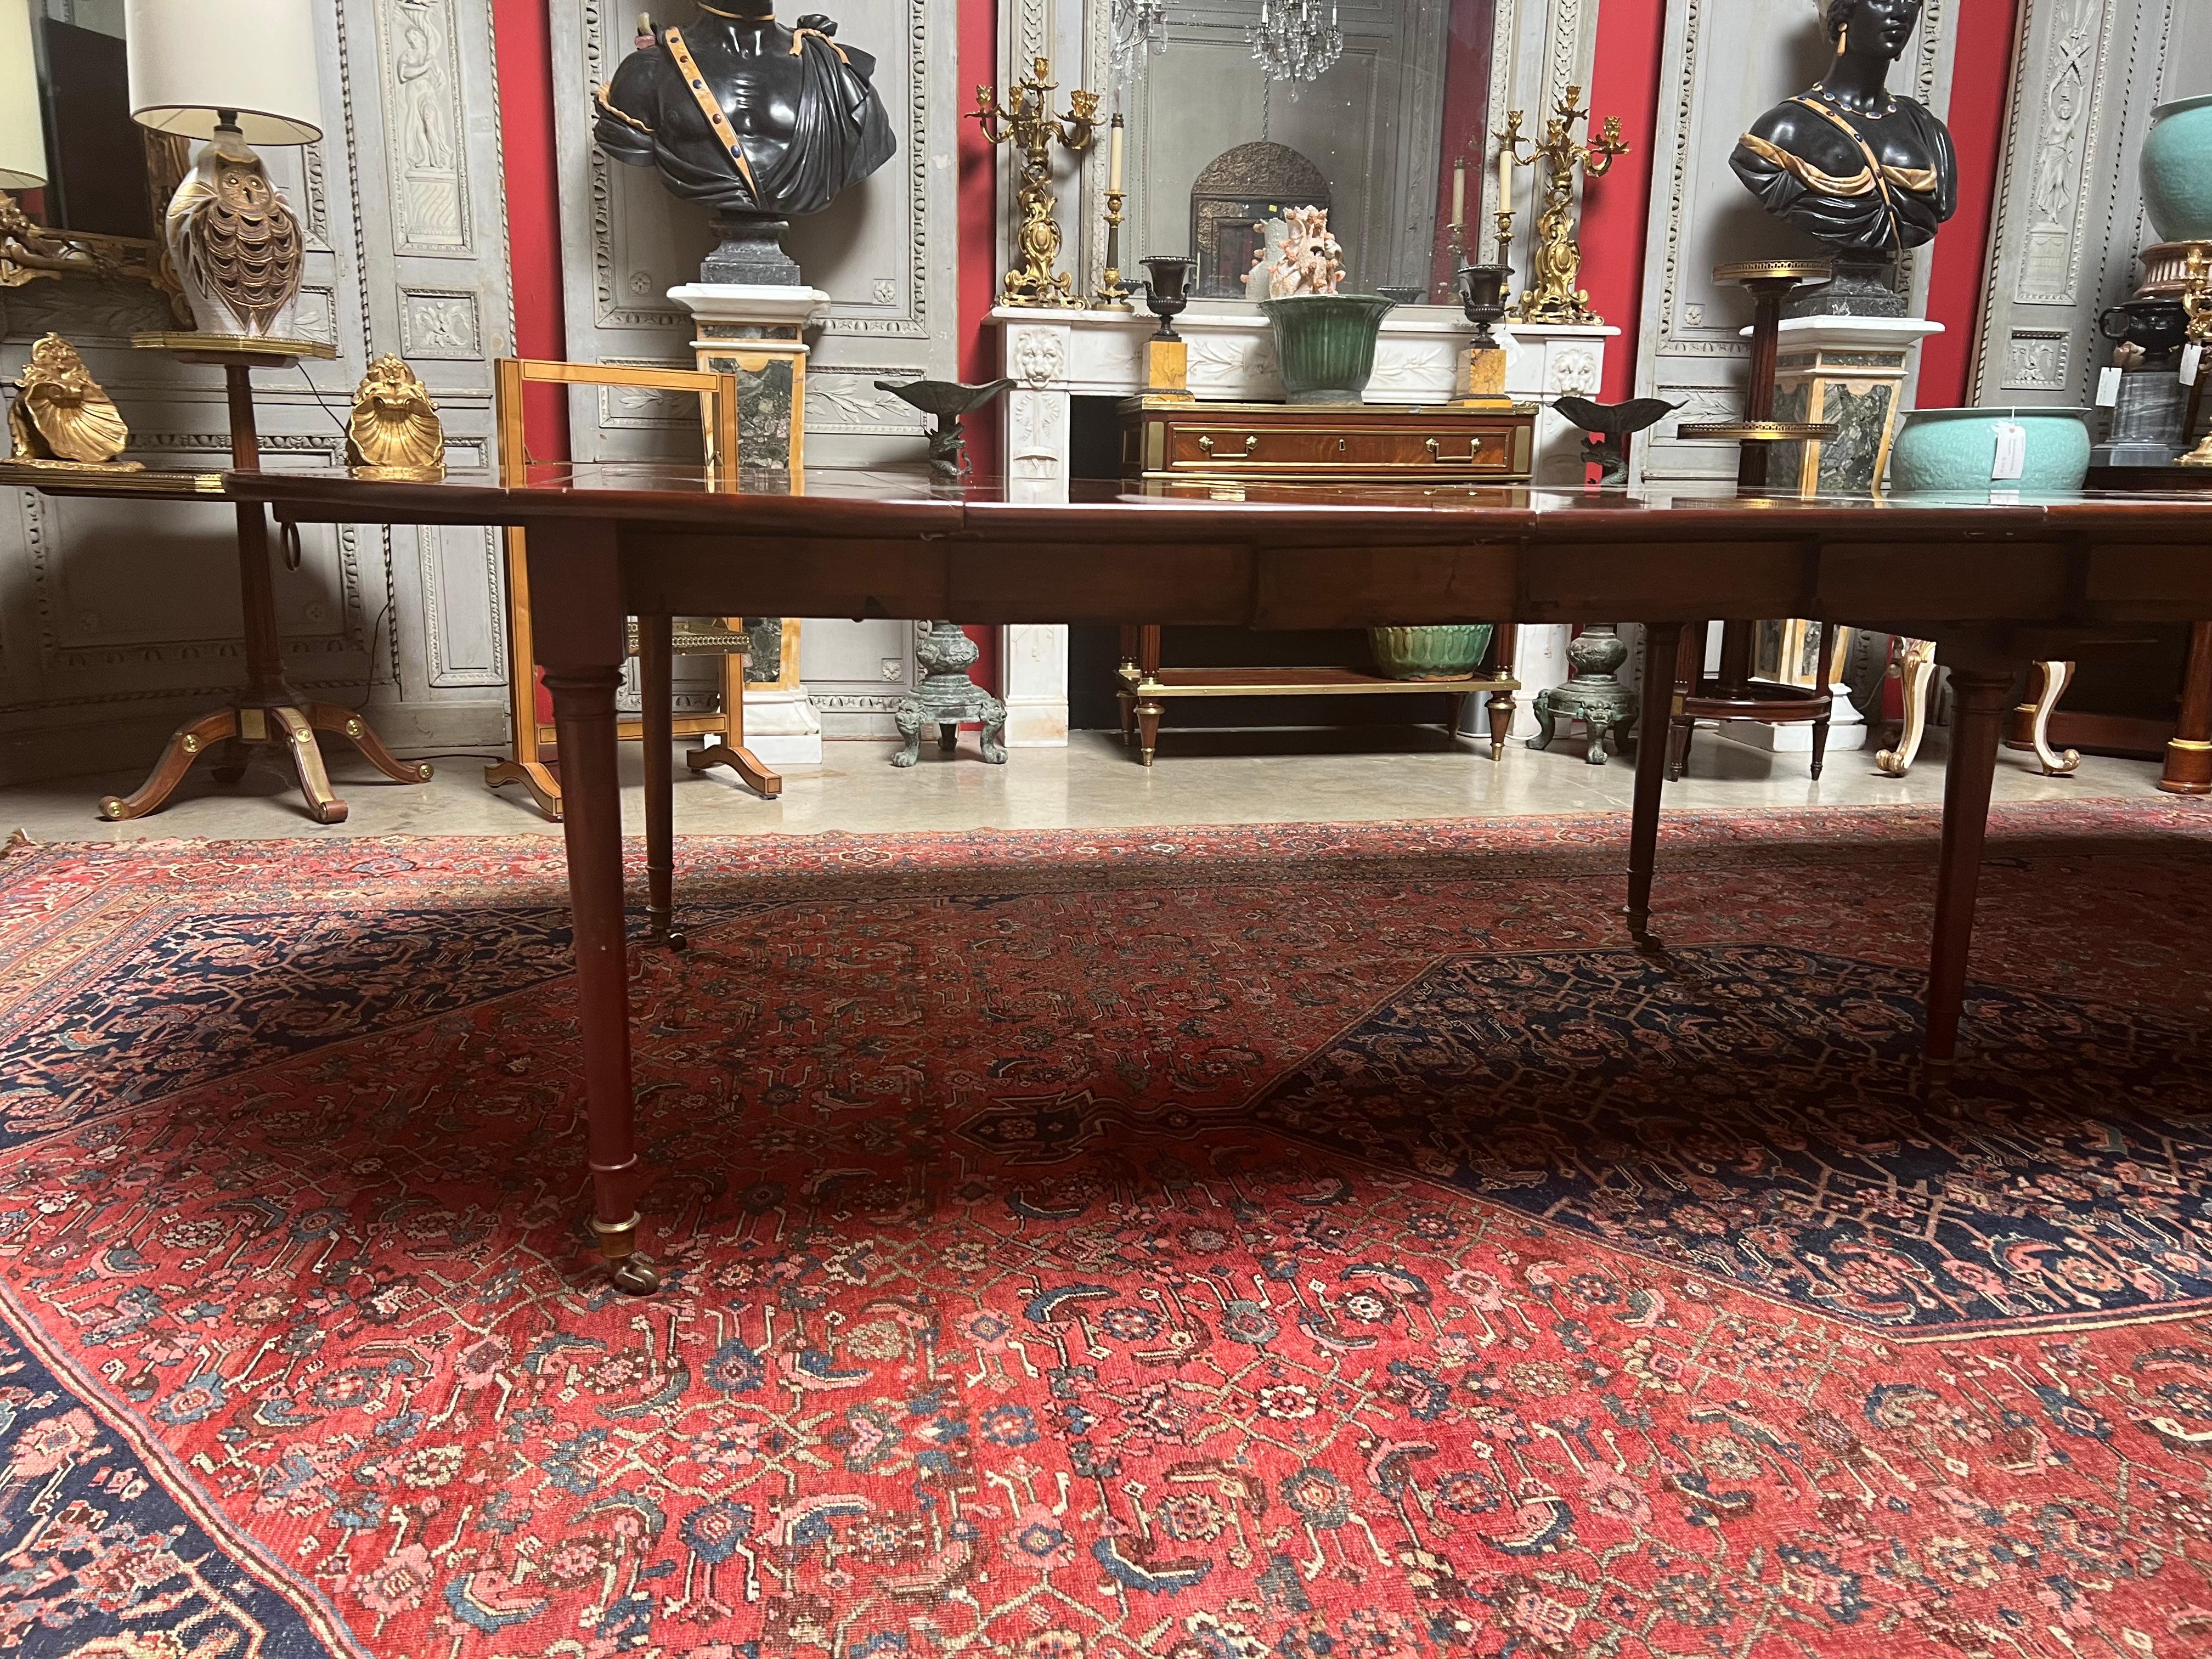 A French mahogany extention dining table dating from the late 18th century with later leaves added in the mid 20th century. 
This versatile table can be extended up to 142.5